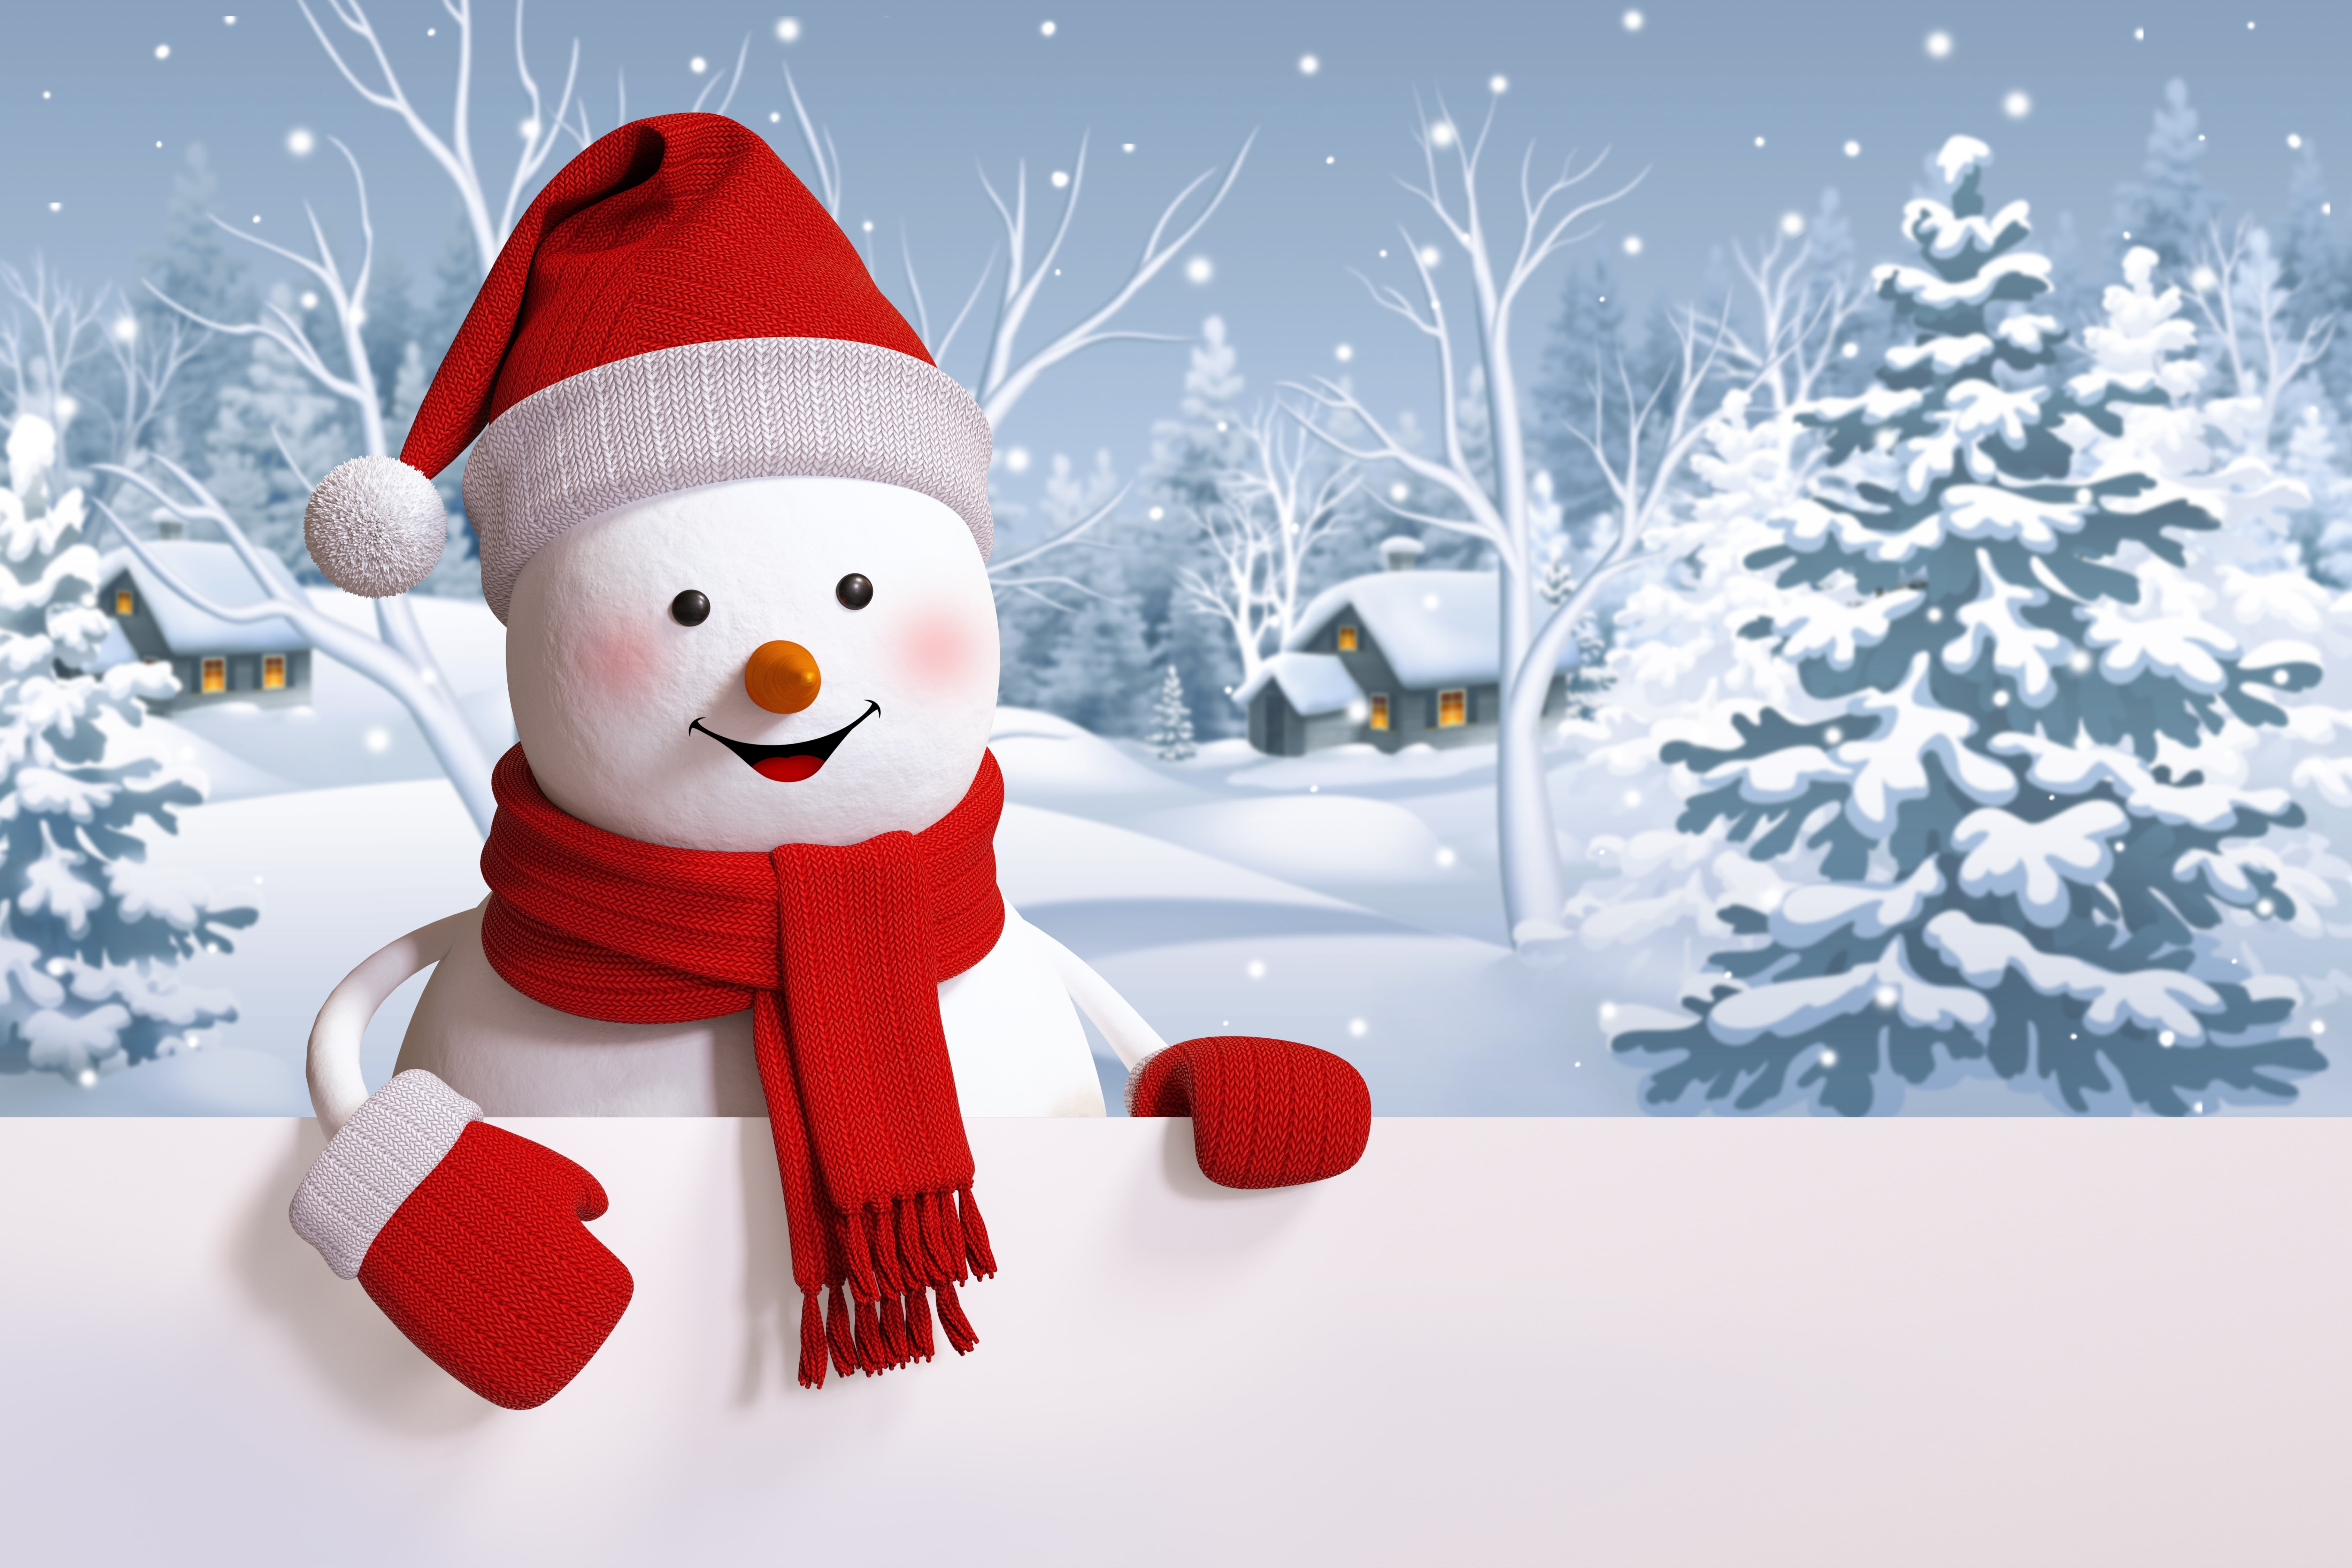 white and red snowman wallpaper, happy, winter, cute